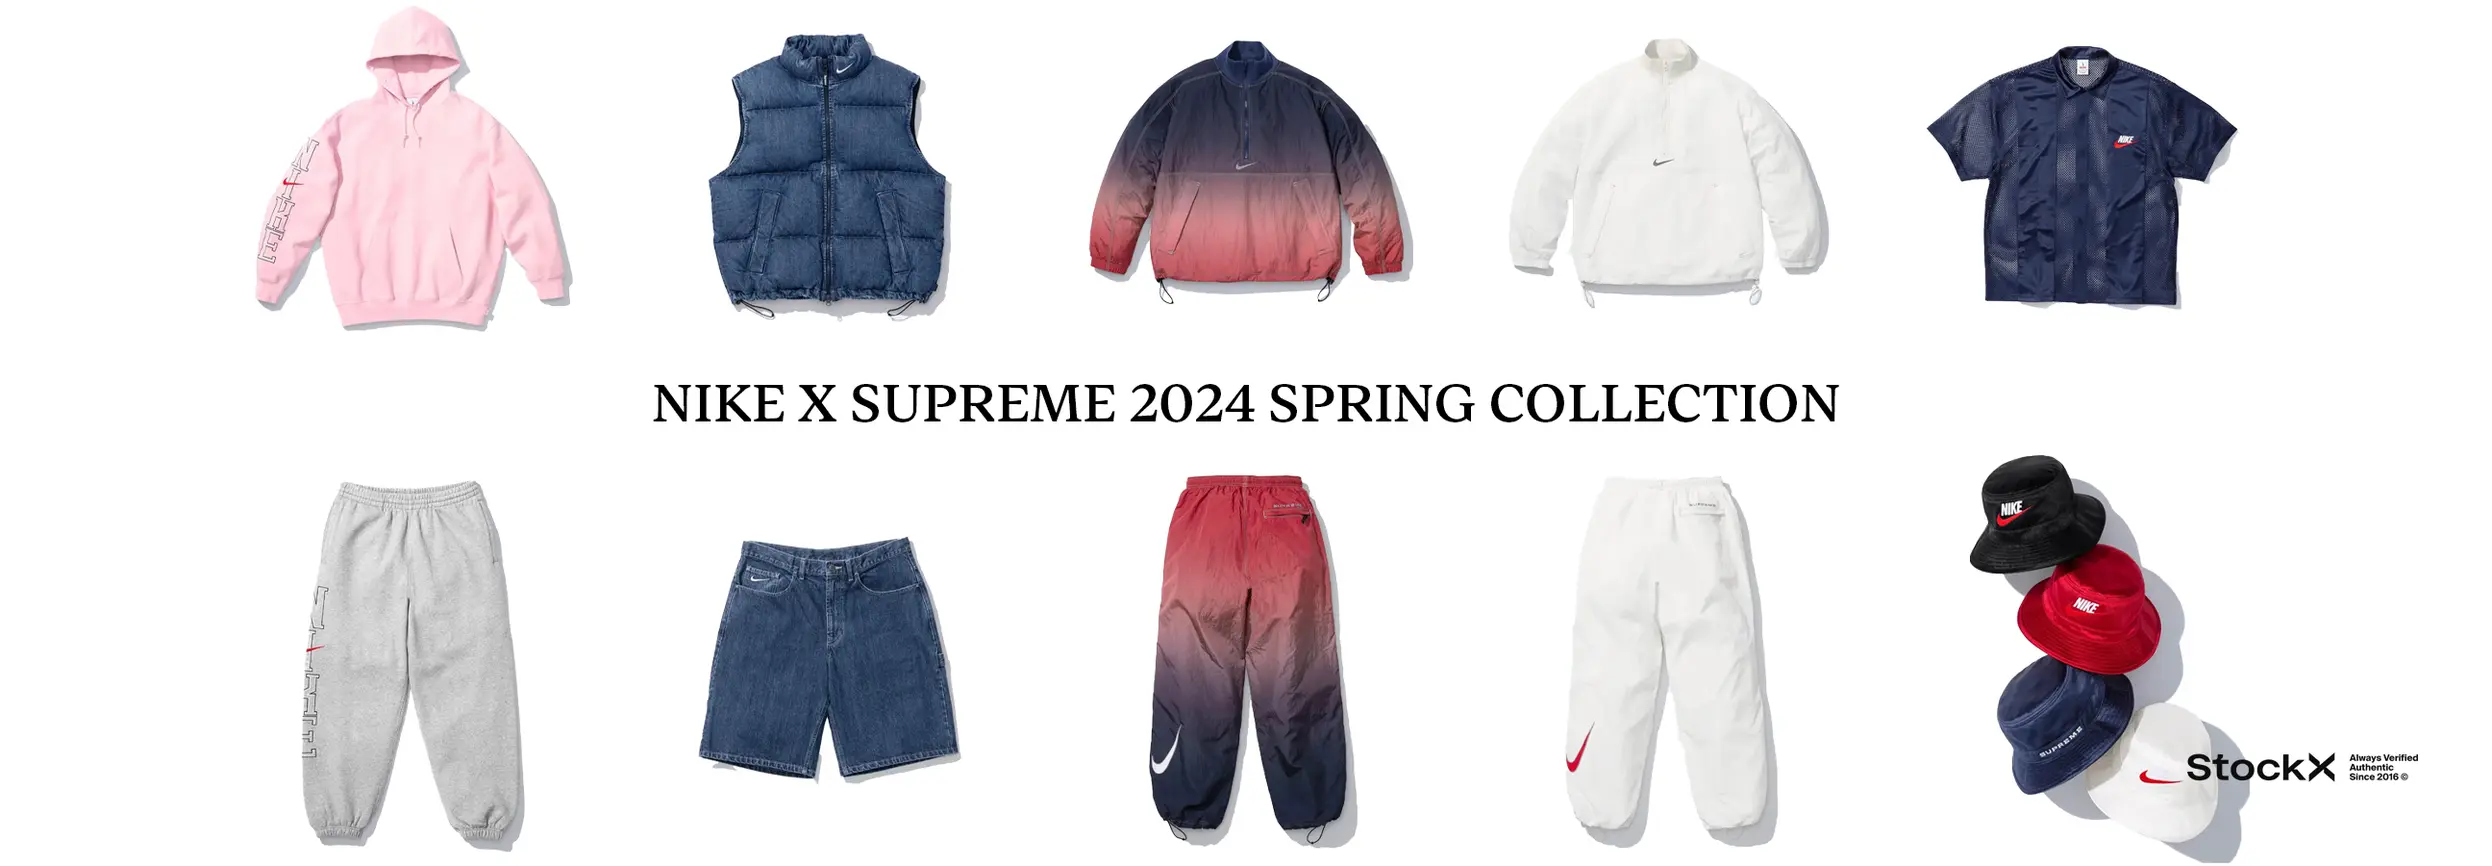 [WEB]NIKE X SUPREME 2024 SPRING COLLECTION.png